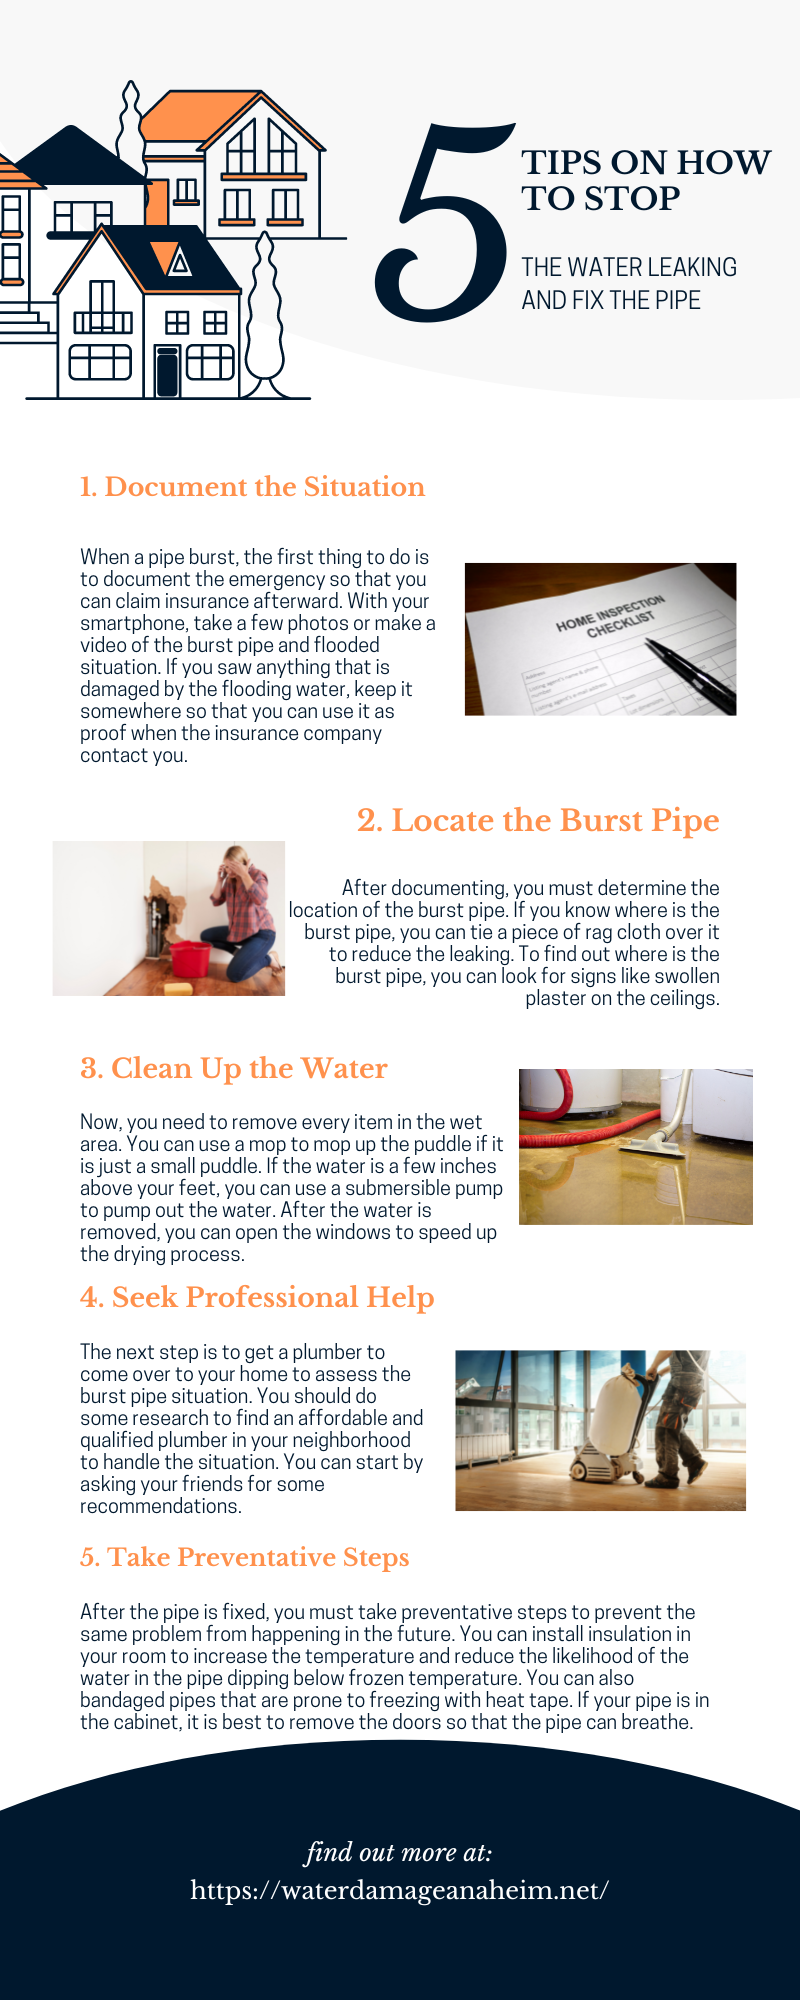 TIPS ON HOW TO STOP THE WATER LEAKING AND FIX THE PIPE